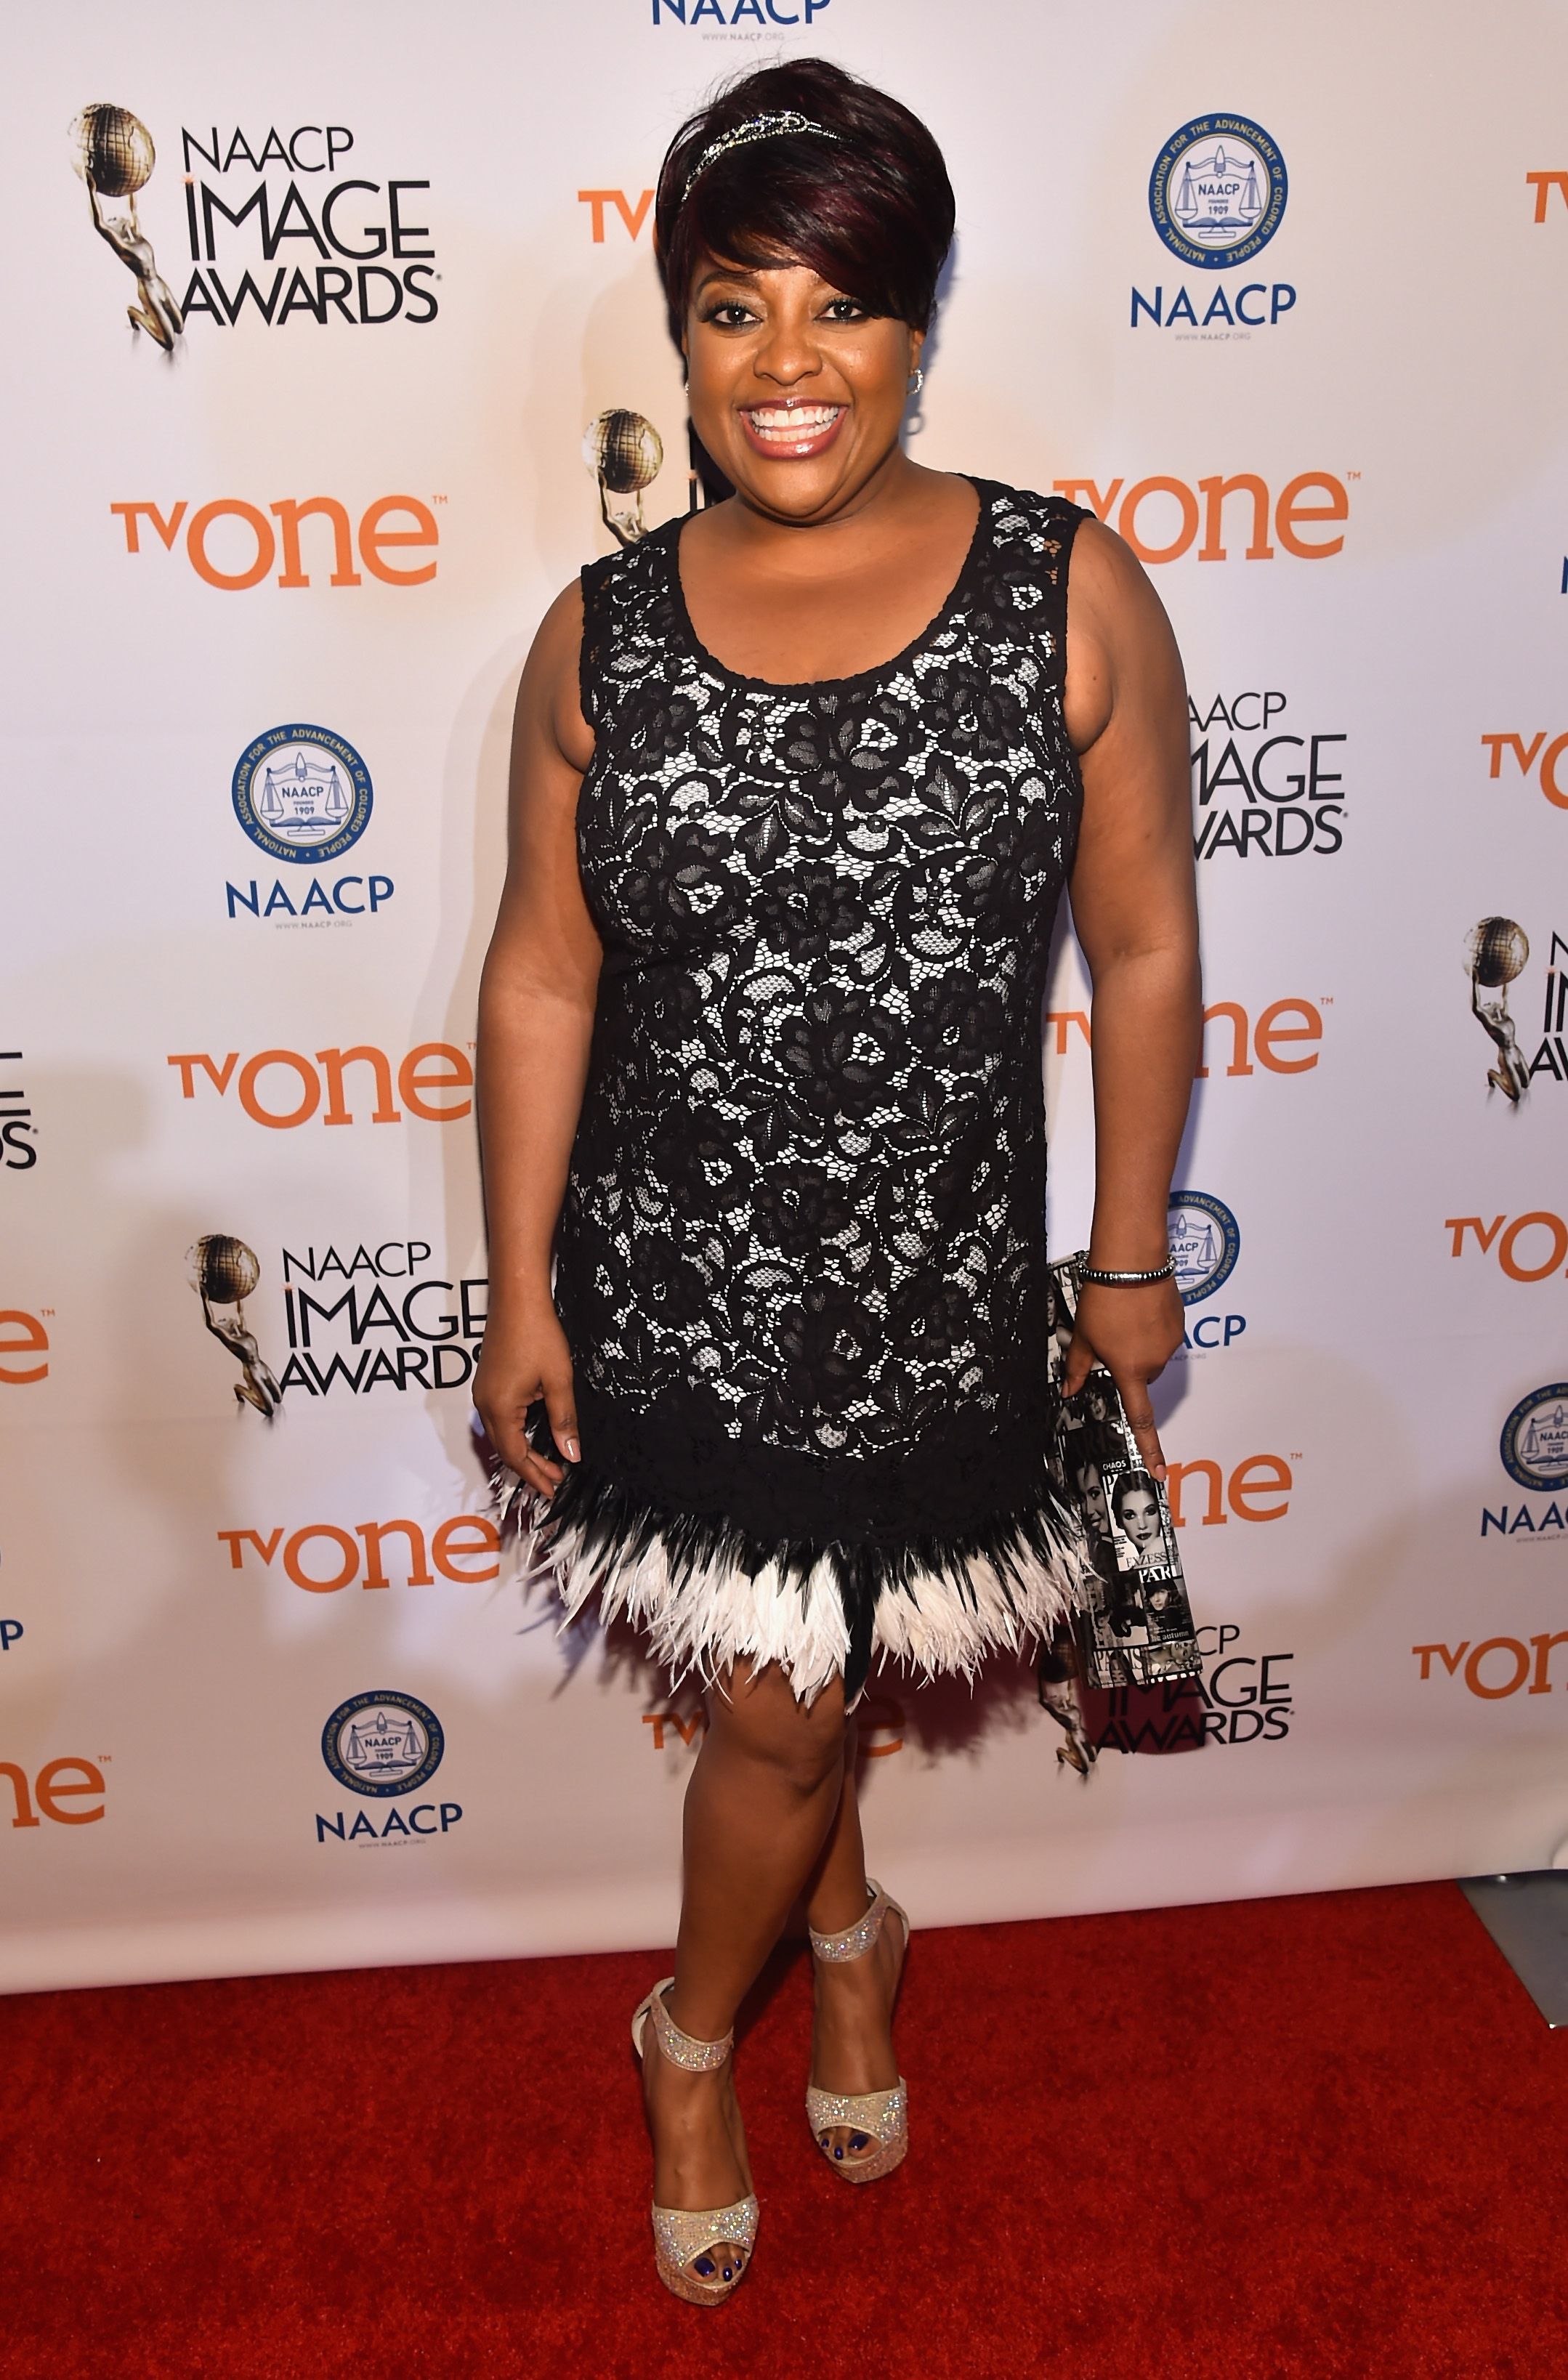 Sherri Shepherd at the NAACP Image Awards on February 5, 2015 in Pasadena. | Photo: Getty Images